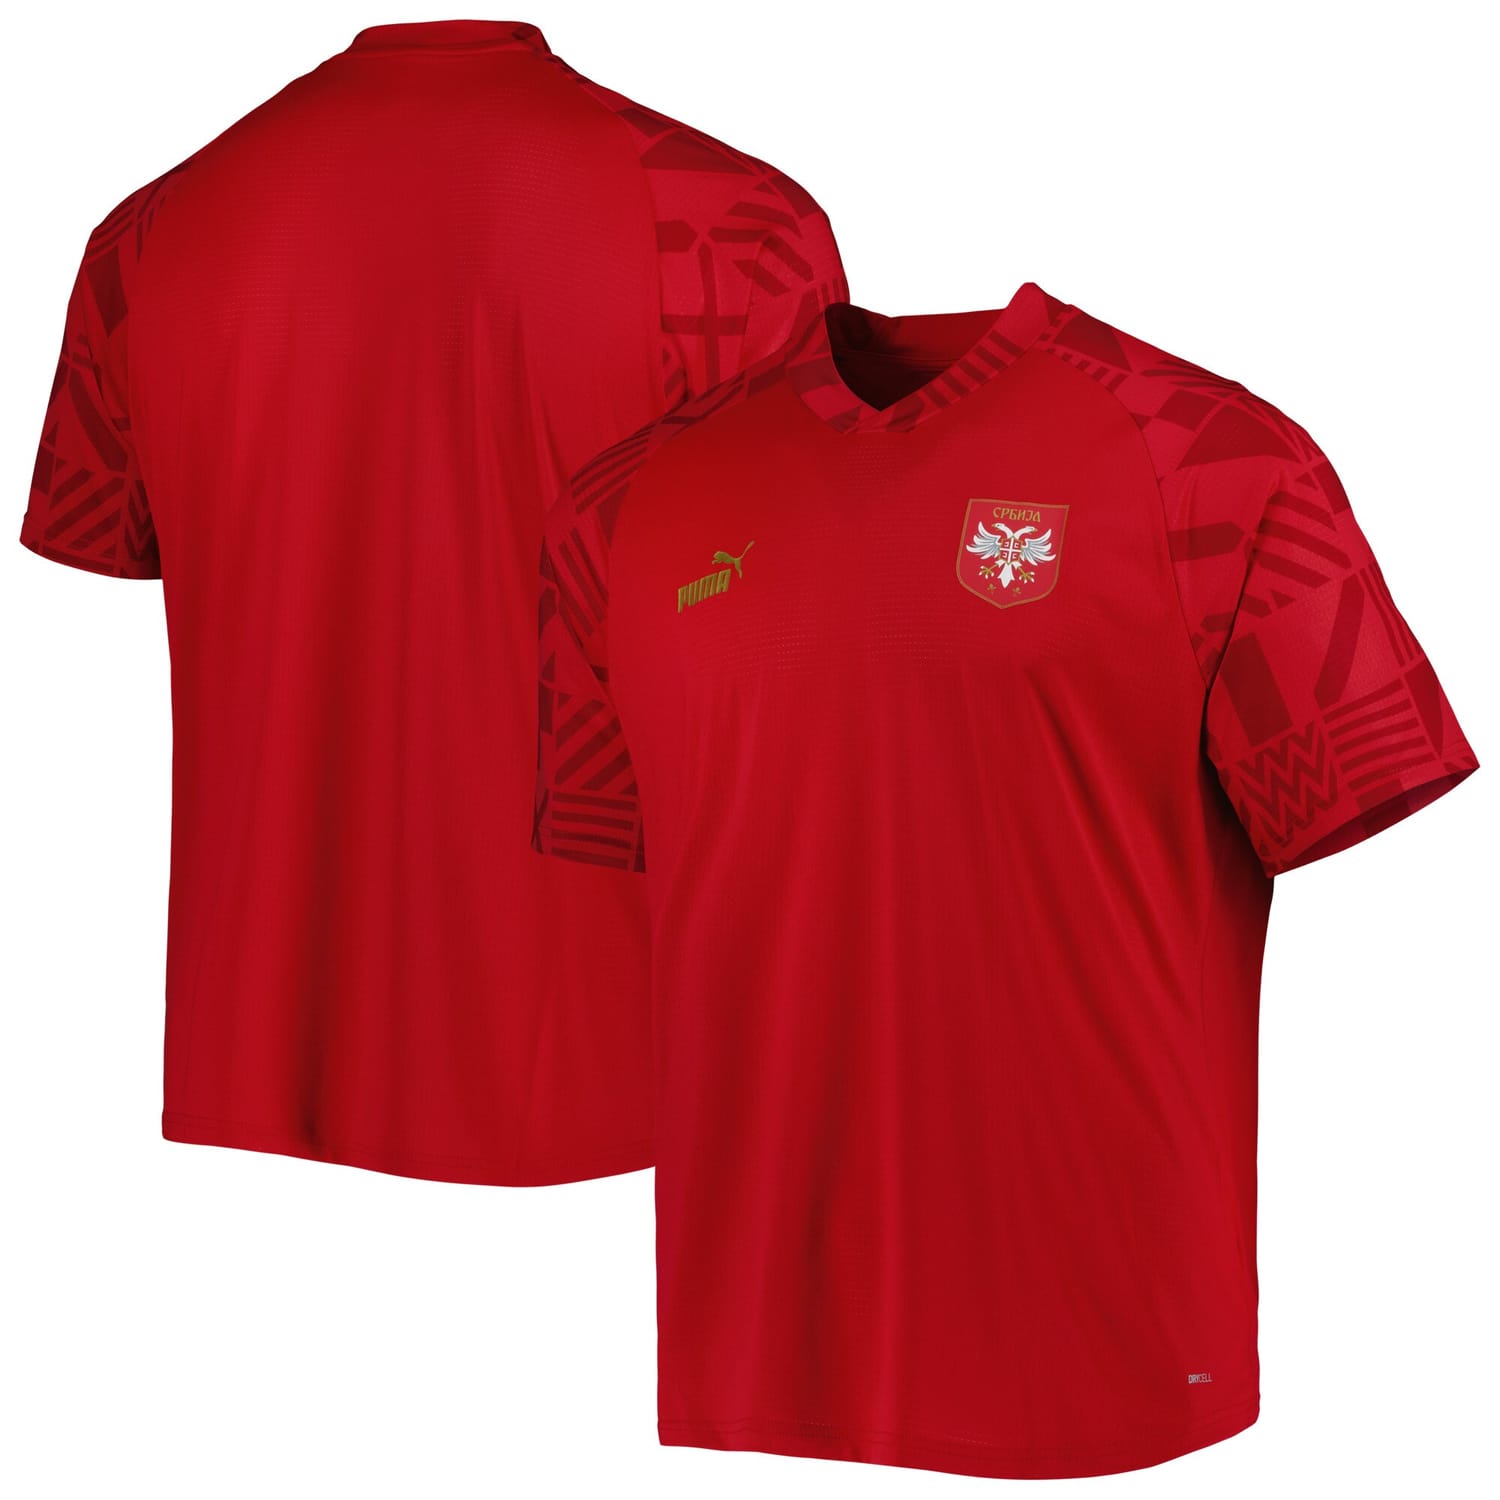 Serbia National Team Pre-Match Jersey Shirt Red for Men